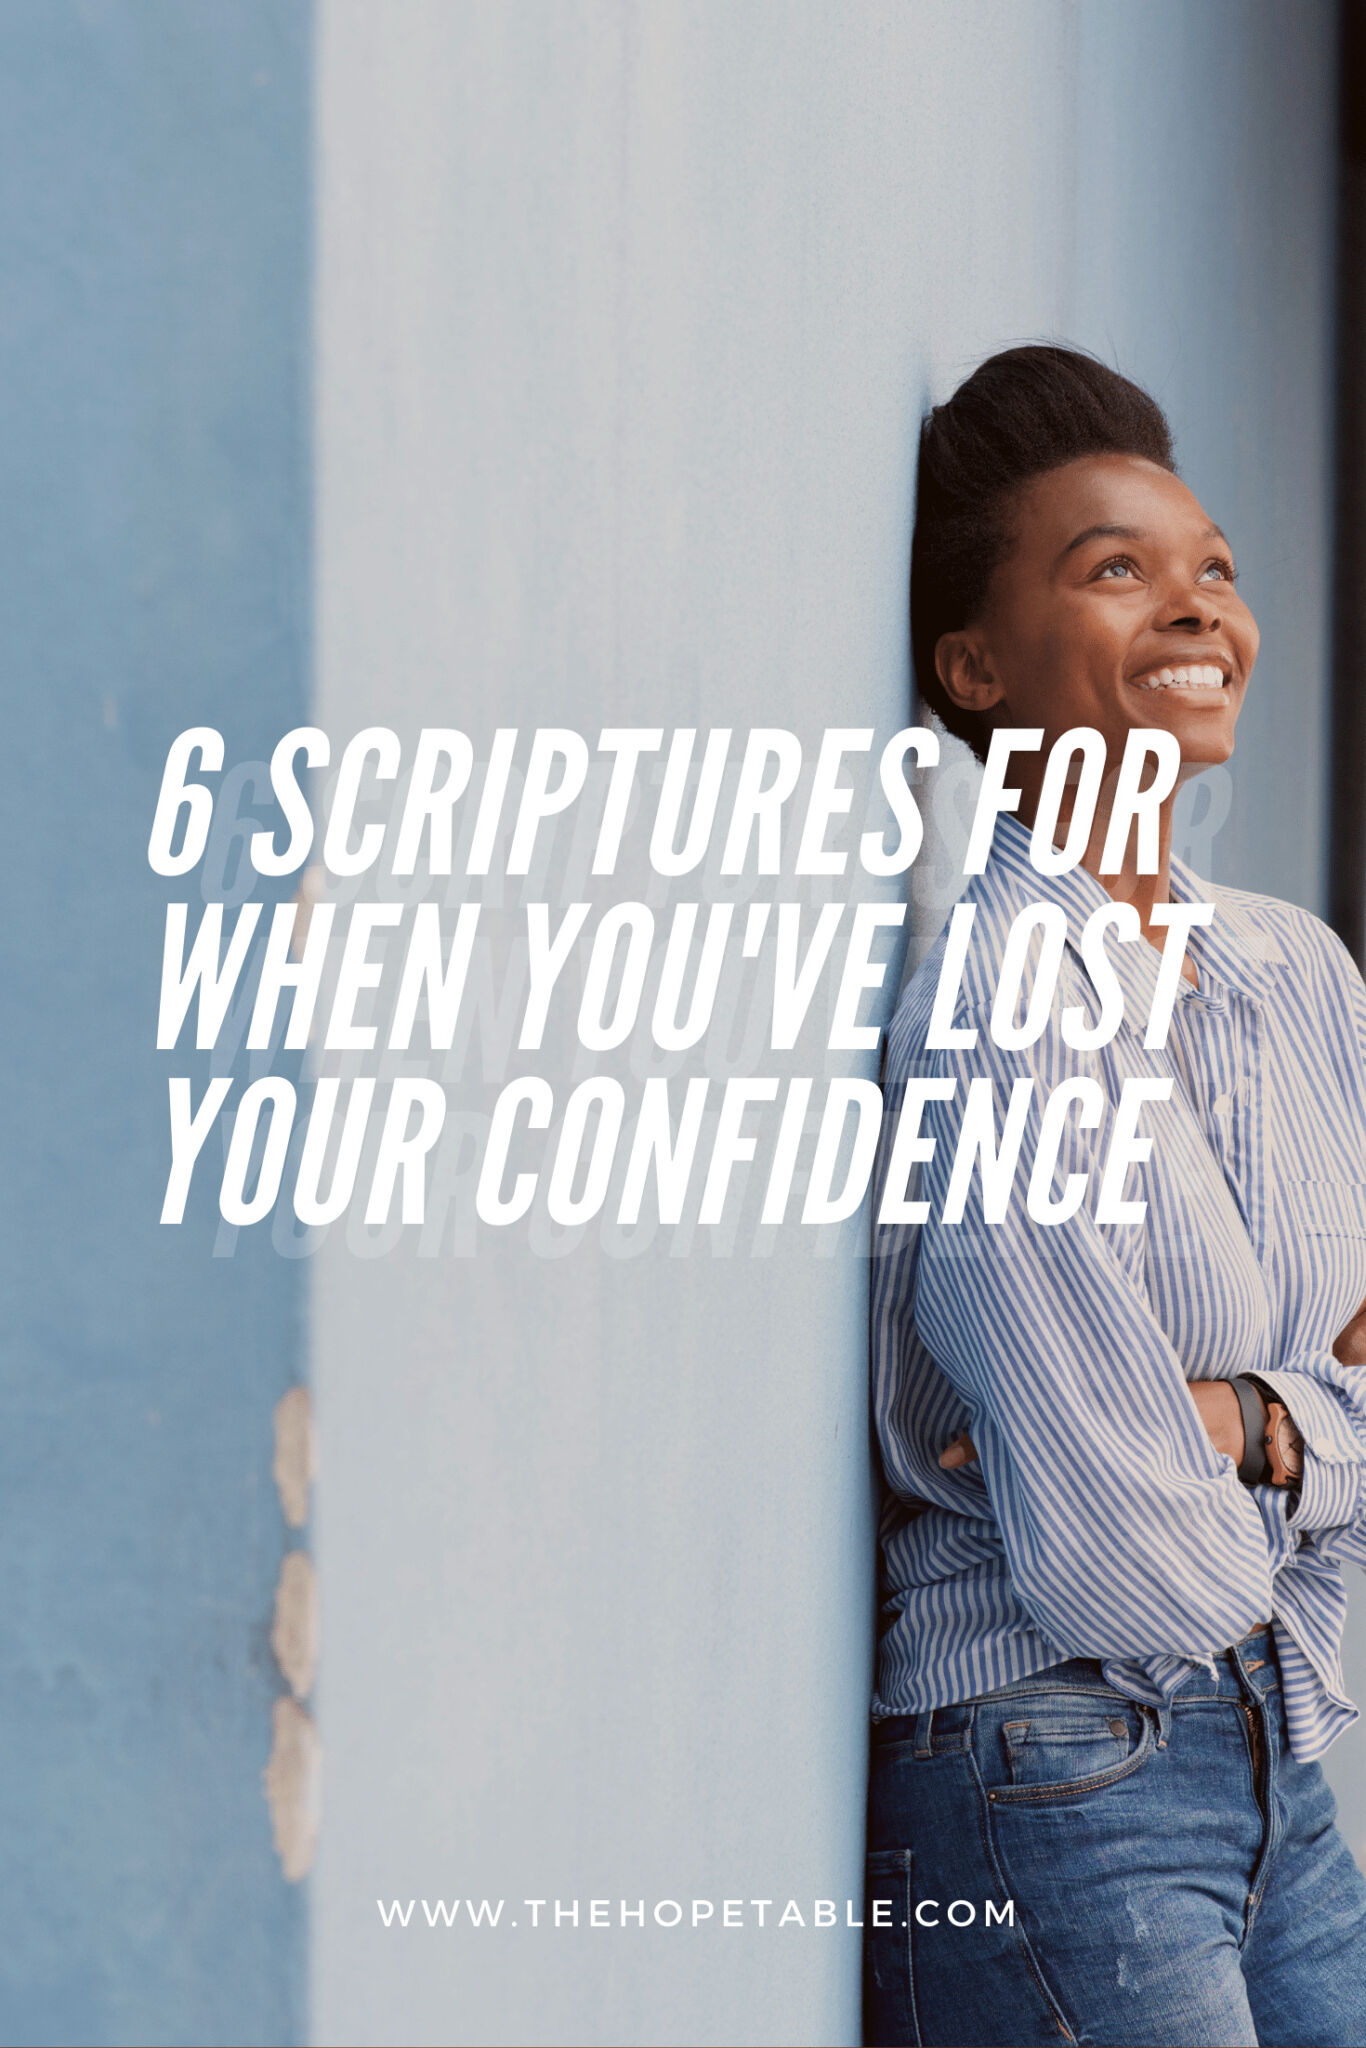 6 scriptures for when you've lost your confidence